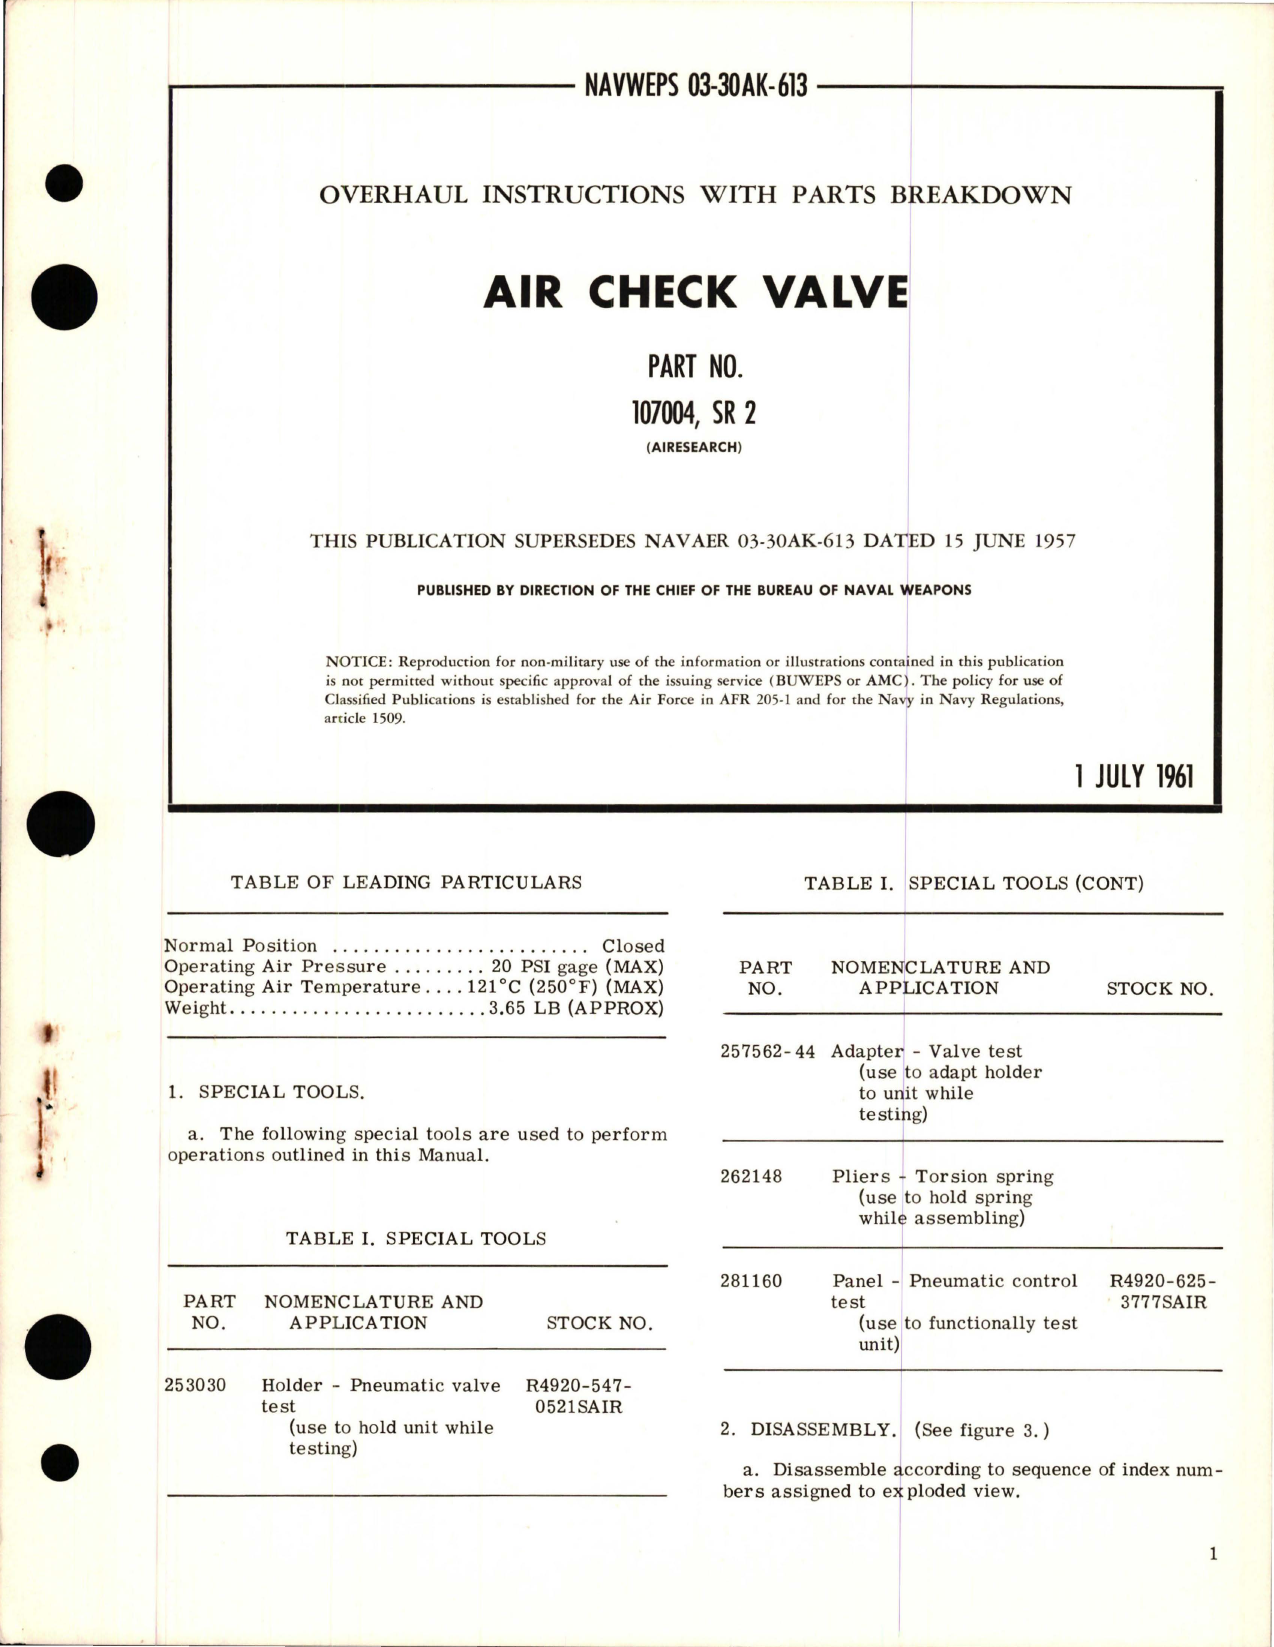 Sample page 1 from AirCorps Library document: Overhaul Instructions with Parts Breakdown for Air Check Valve - Part 107004, SR 2